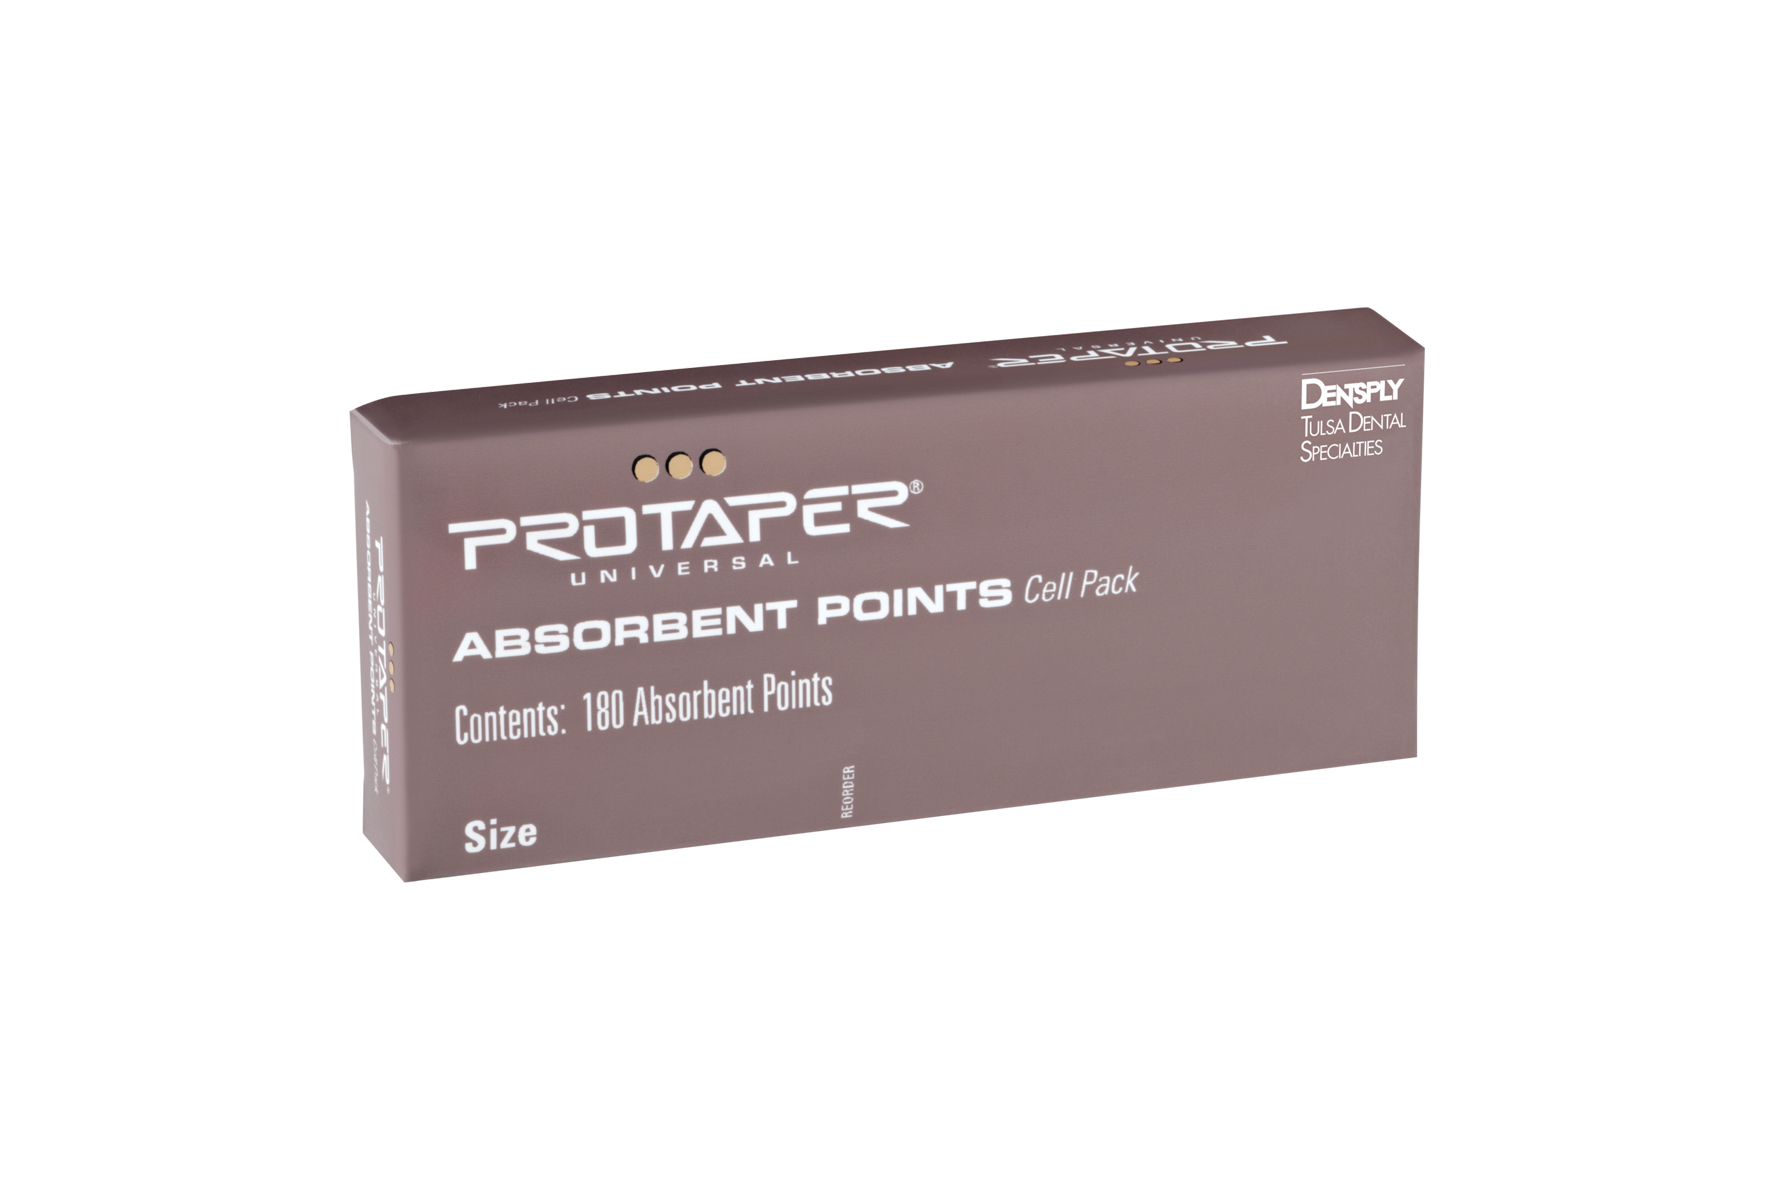 ProTaper Universal Absorbent Points